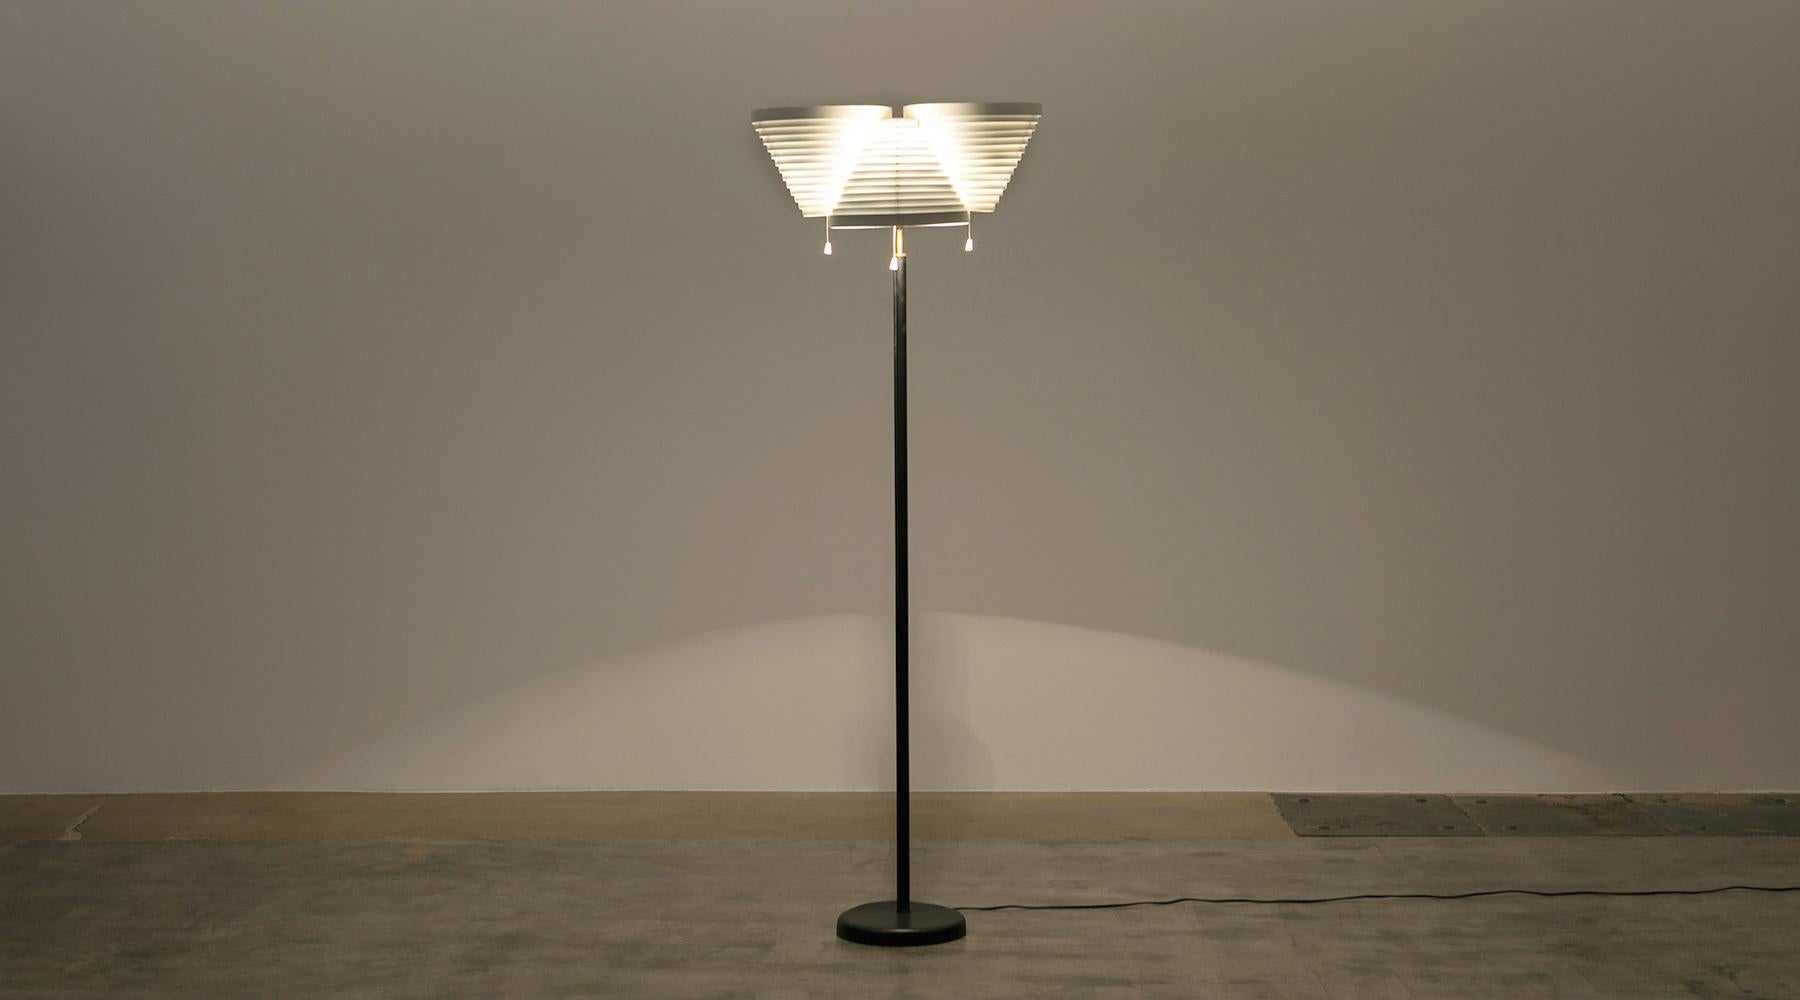 Floor lamp, enameled metal shade, leather covered stem, Alvar Aalto, Finland, 1953

This magnificent floor lamp was designed by the renowned Finnish architect Alvar Aalto. The lamp comes with three thrilling asymmetrical shades in enameled steel.